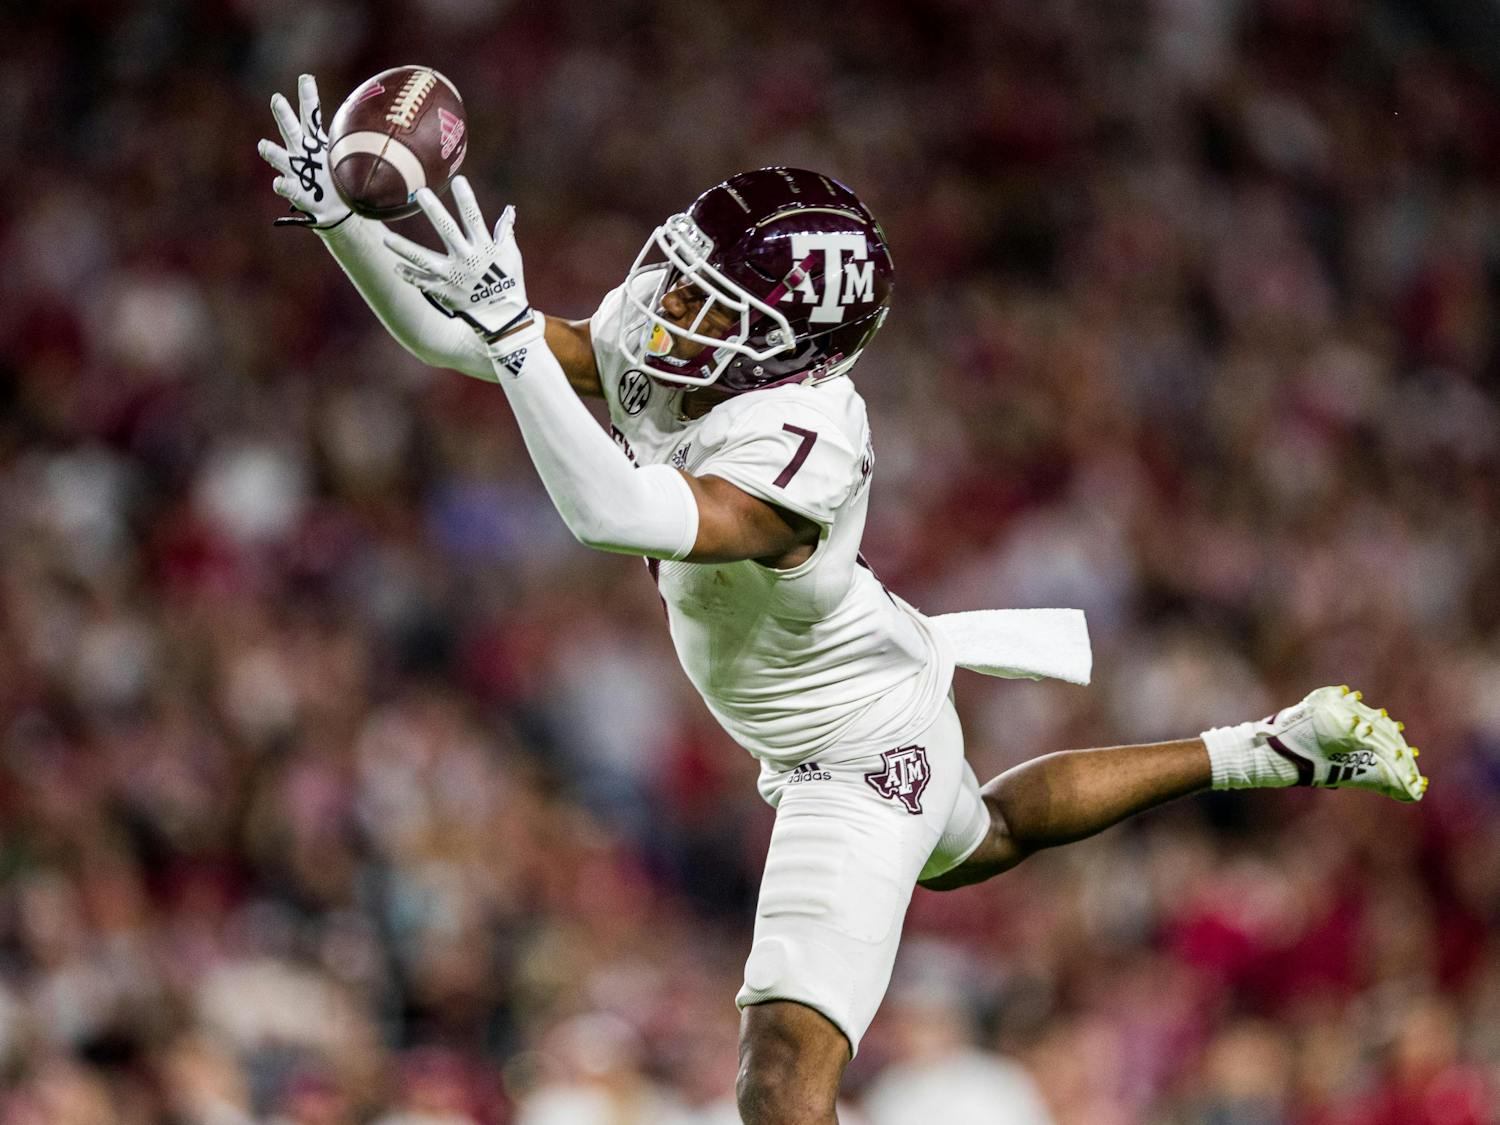 Sophomore wide receiver Moose Muhammad III reaching for the ball at Texas A&M's matchup against Miami on Sep. 17, 2022.